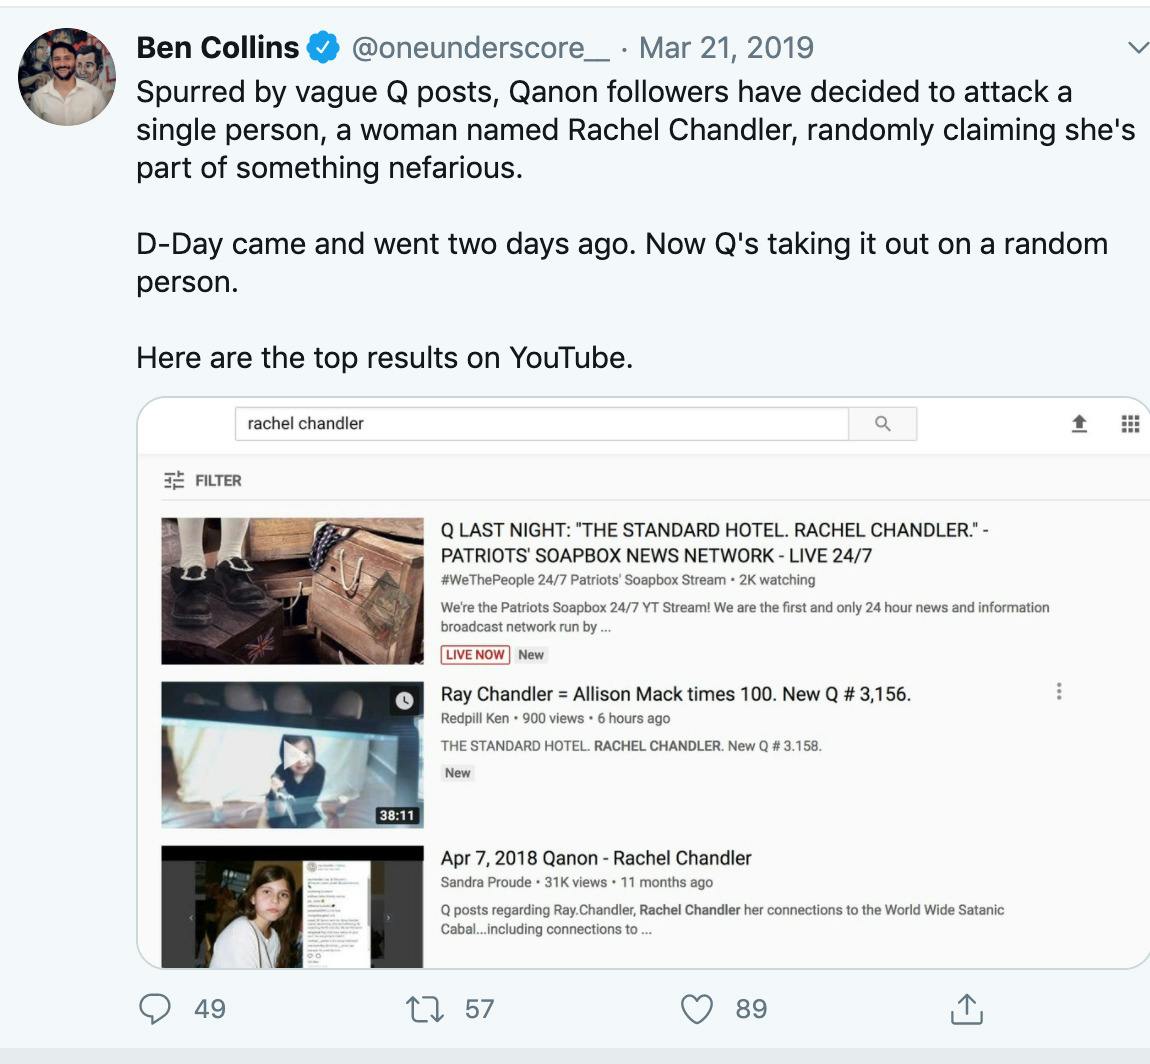 A Twitter post showing the Qanon attack on Rachel Chandler